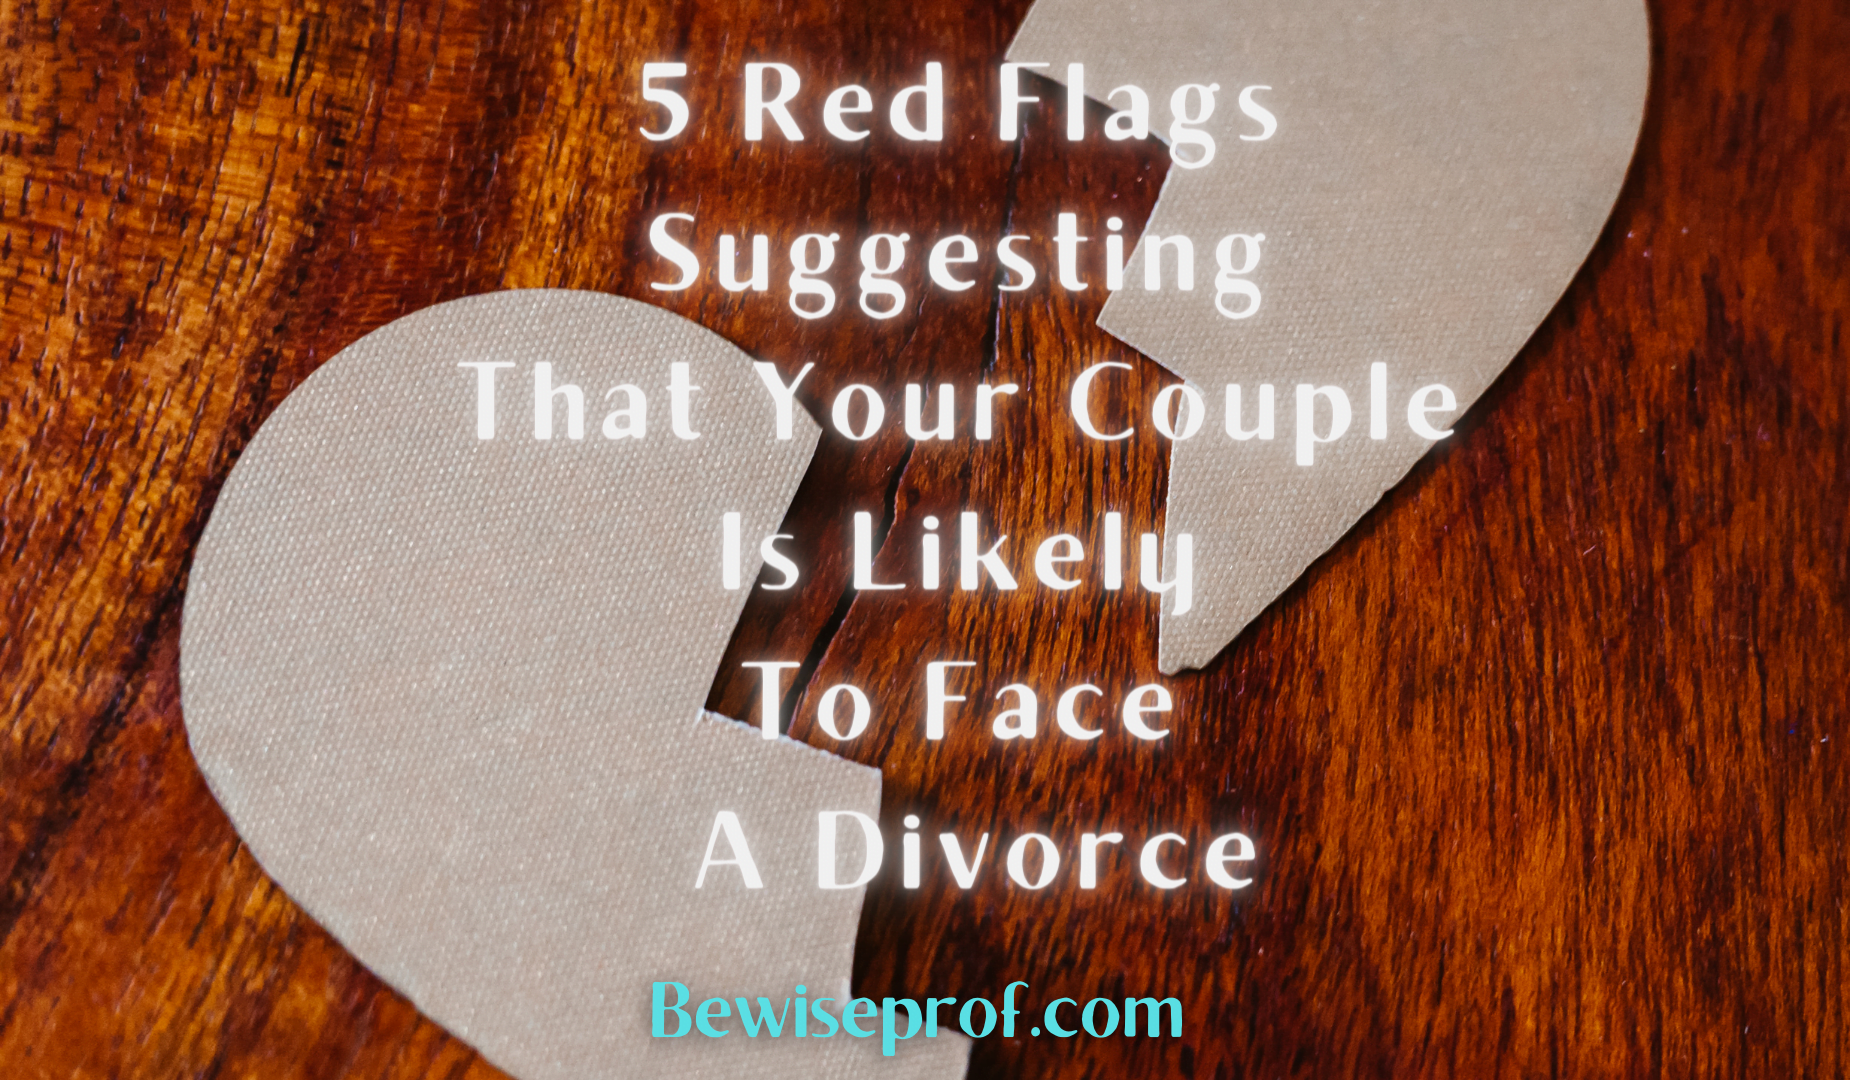 5 Red Flags Suggesting That Your Couple Is Likely To Face A Divorce